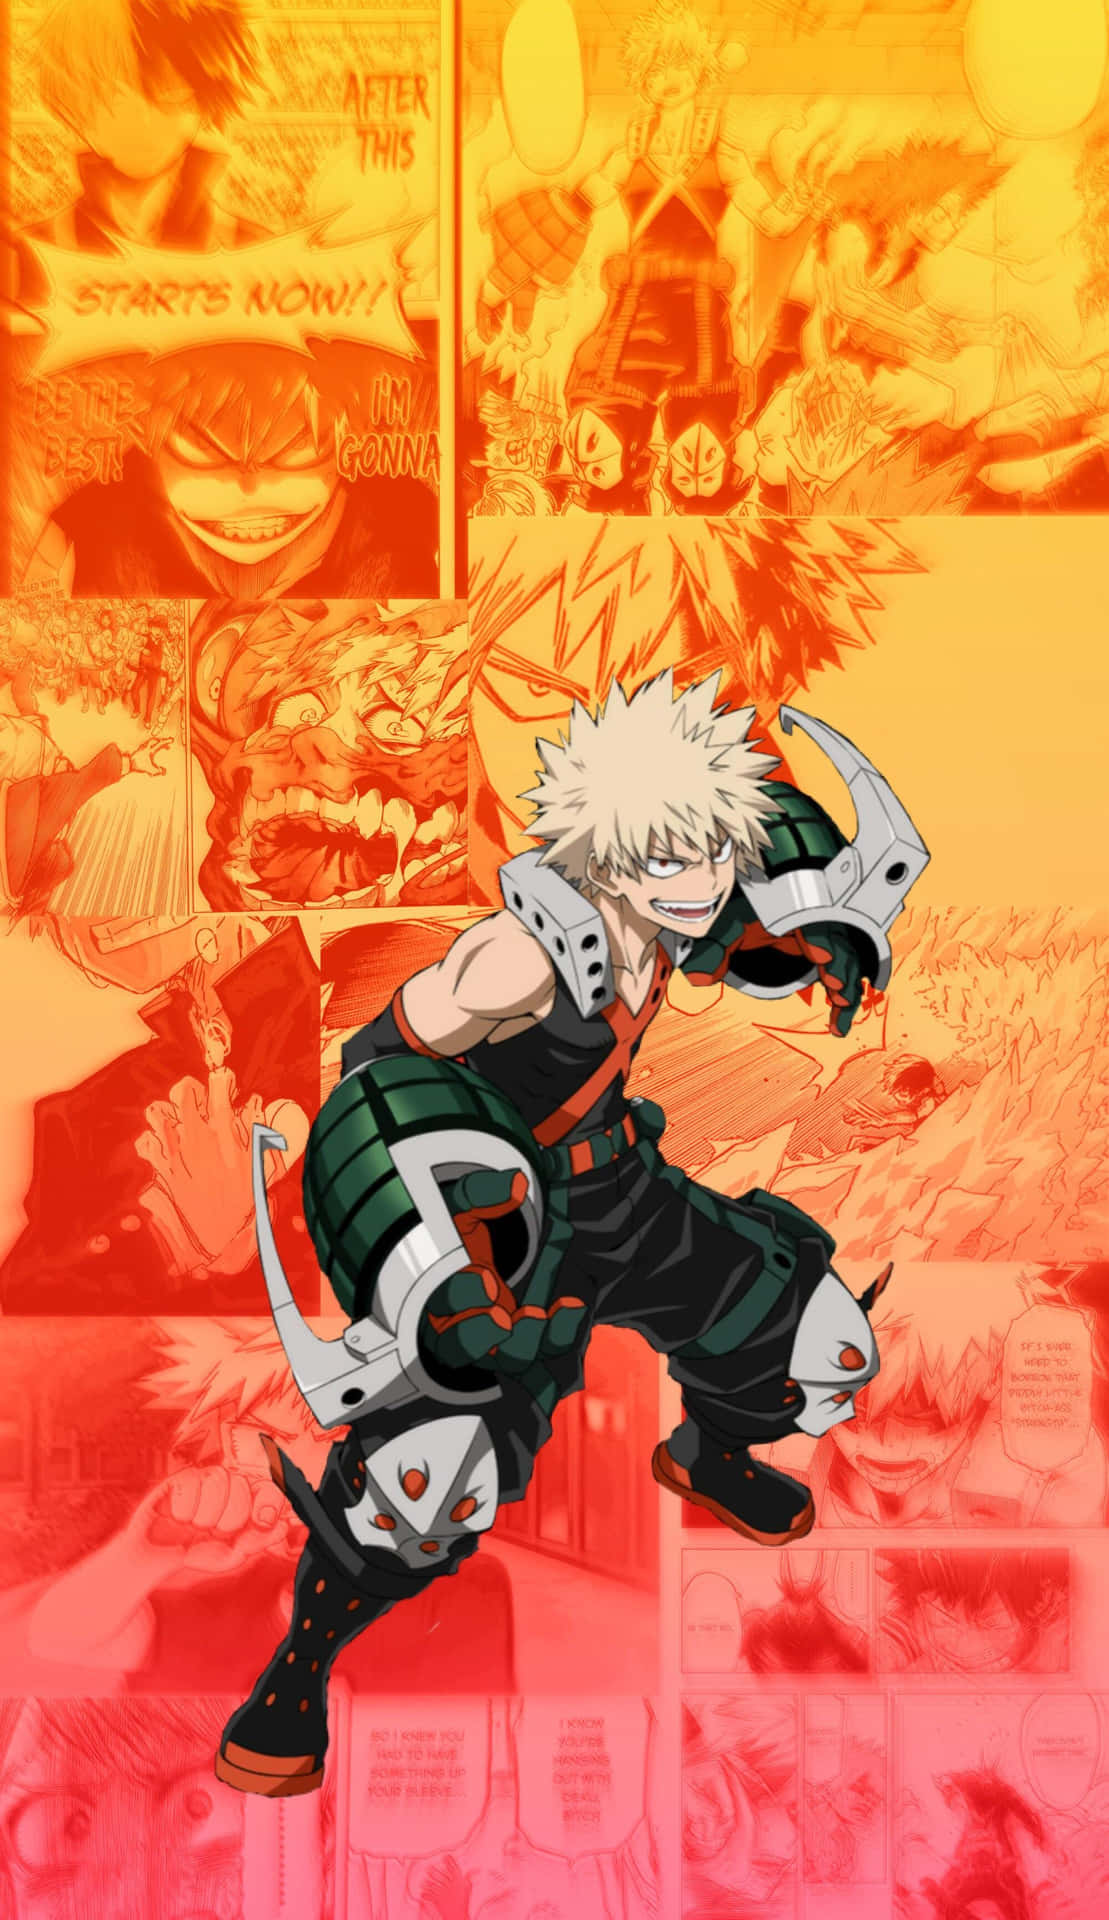 Bakugou With An Intense Expression And Attitude 🔥